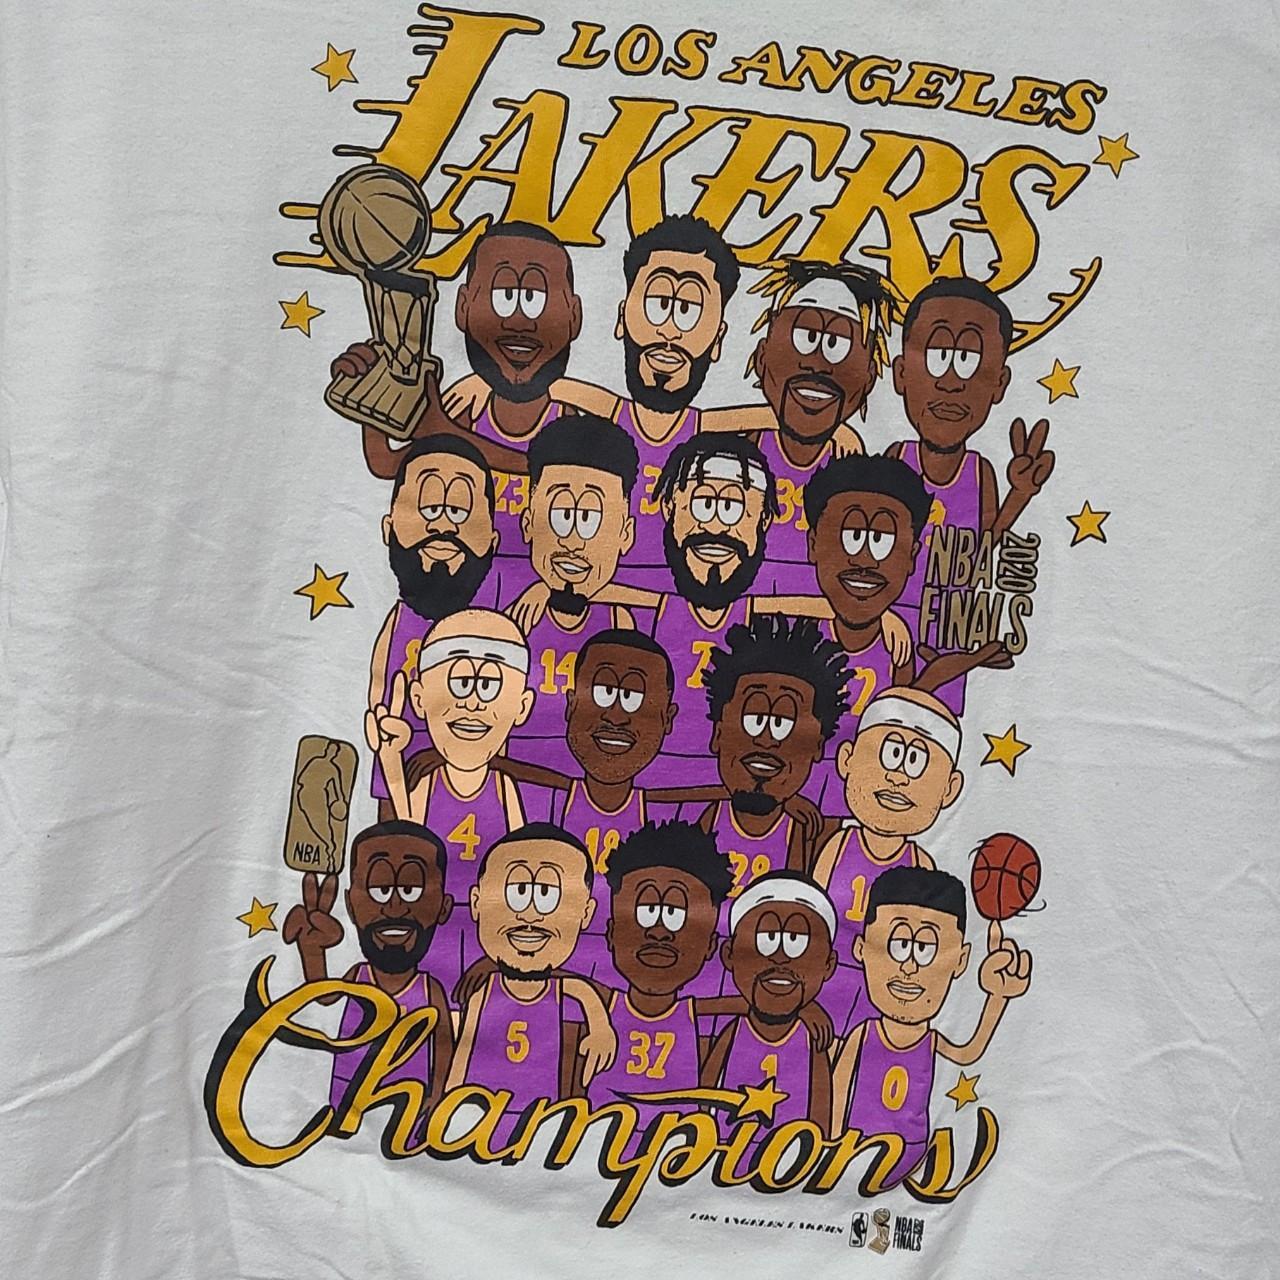 NBA - 🏆 The 2020 NBA CHAMPIONS the Los Angeles Lakers!